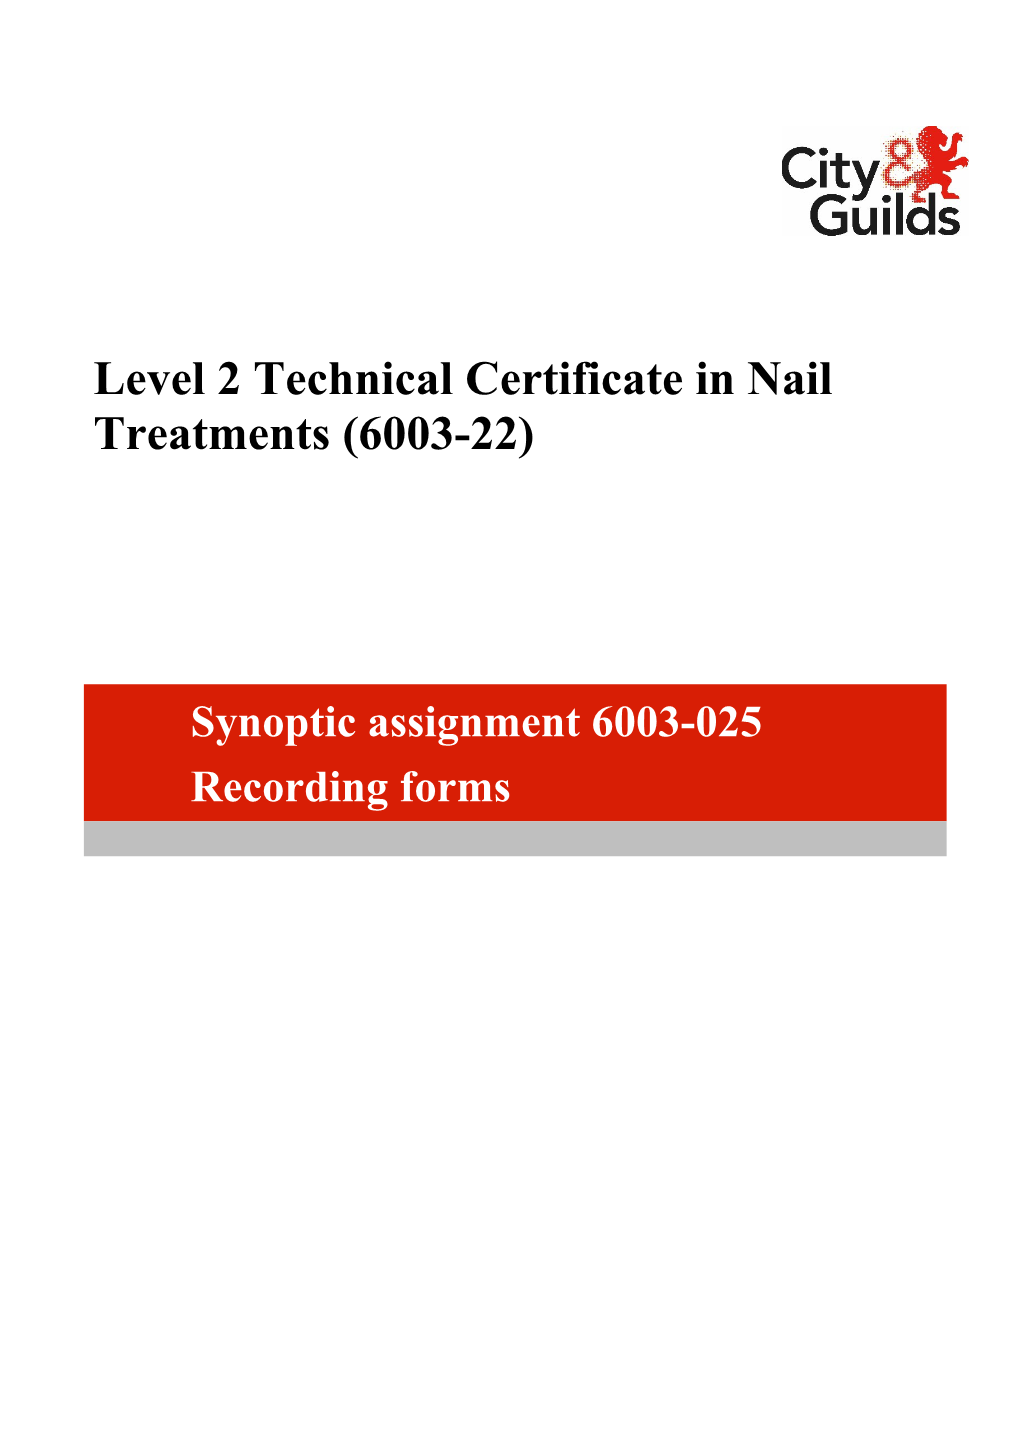 Level 2 Technical Certificate in Nail Treatments (6003-22)